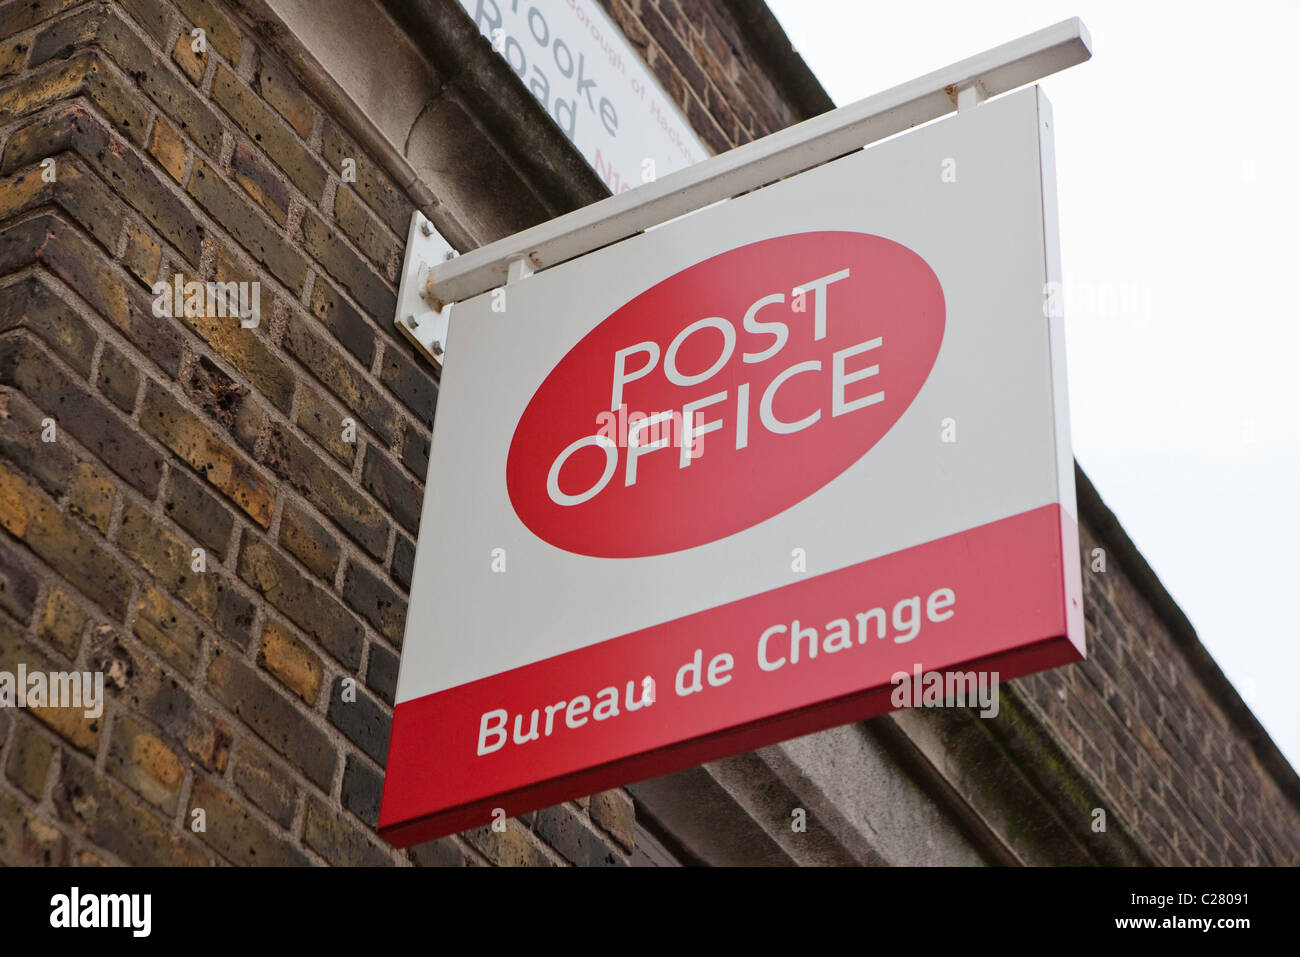 The sign outside the Post office. Stock Photo